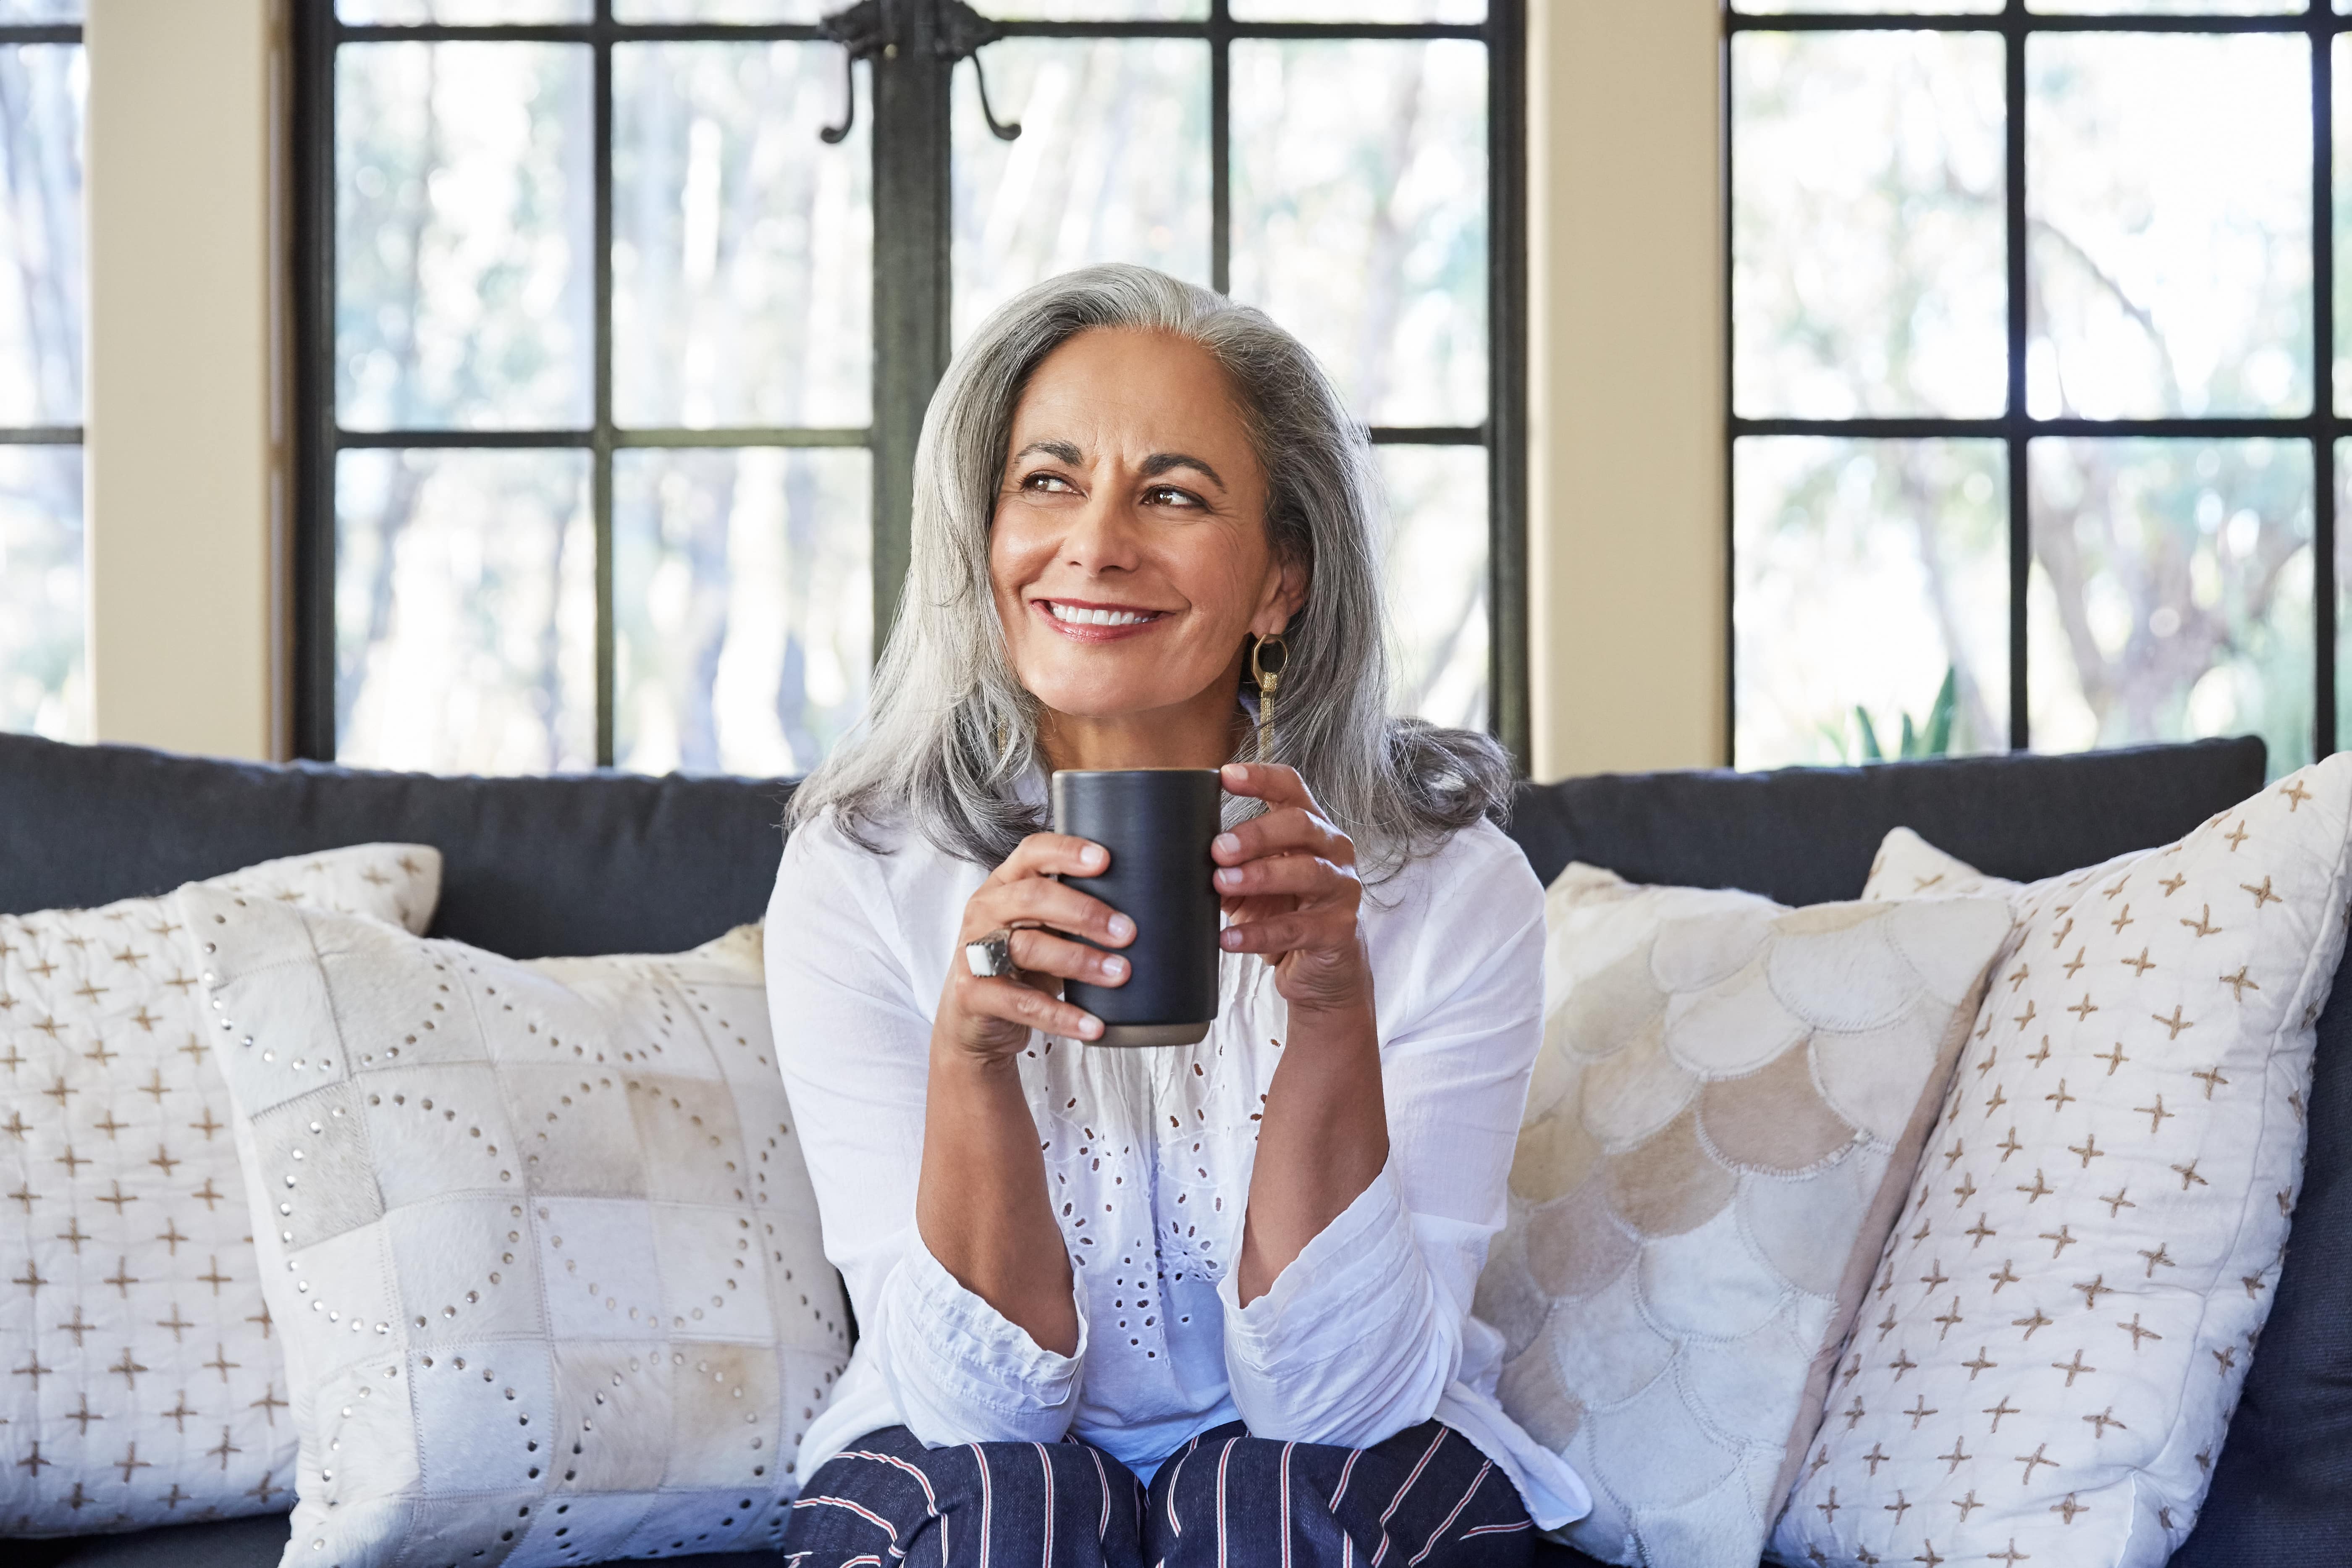 Older woman sitting on a couch holding coffee